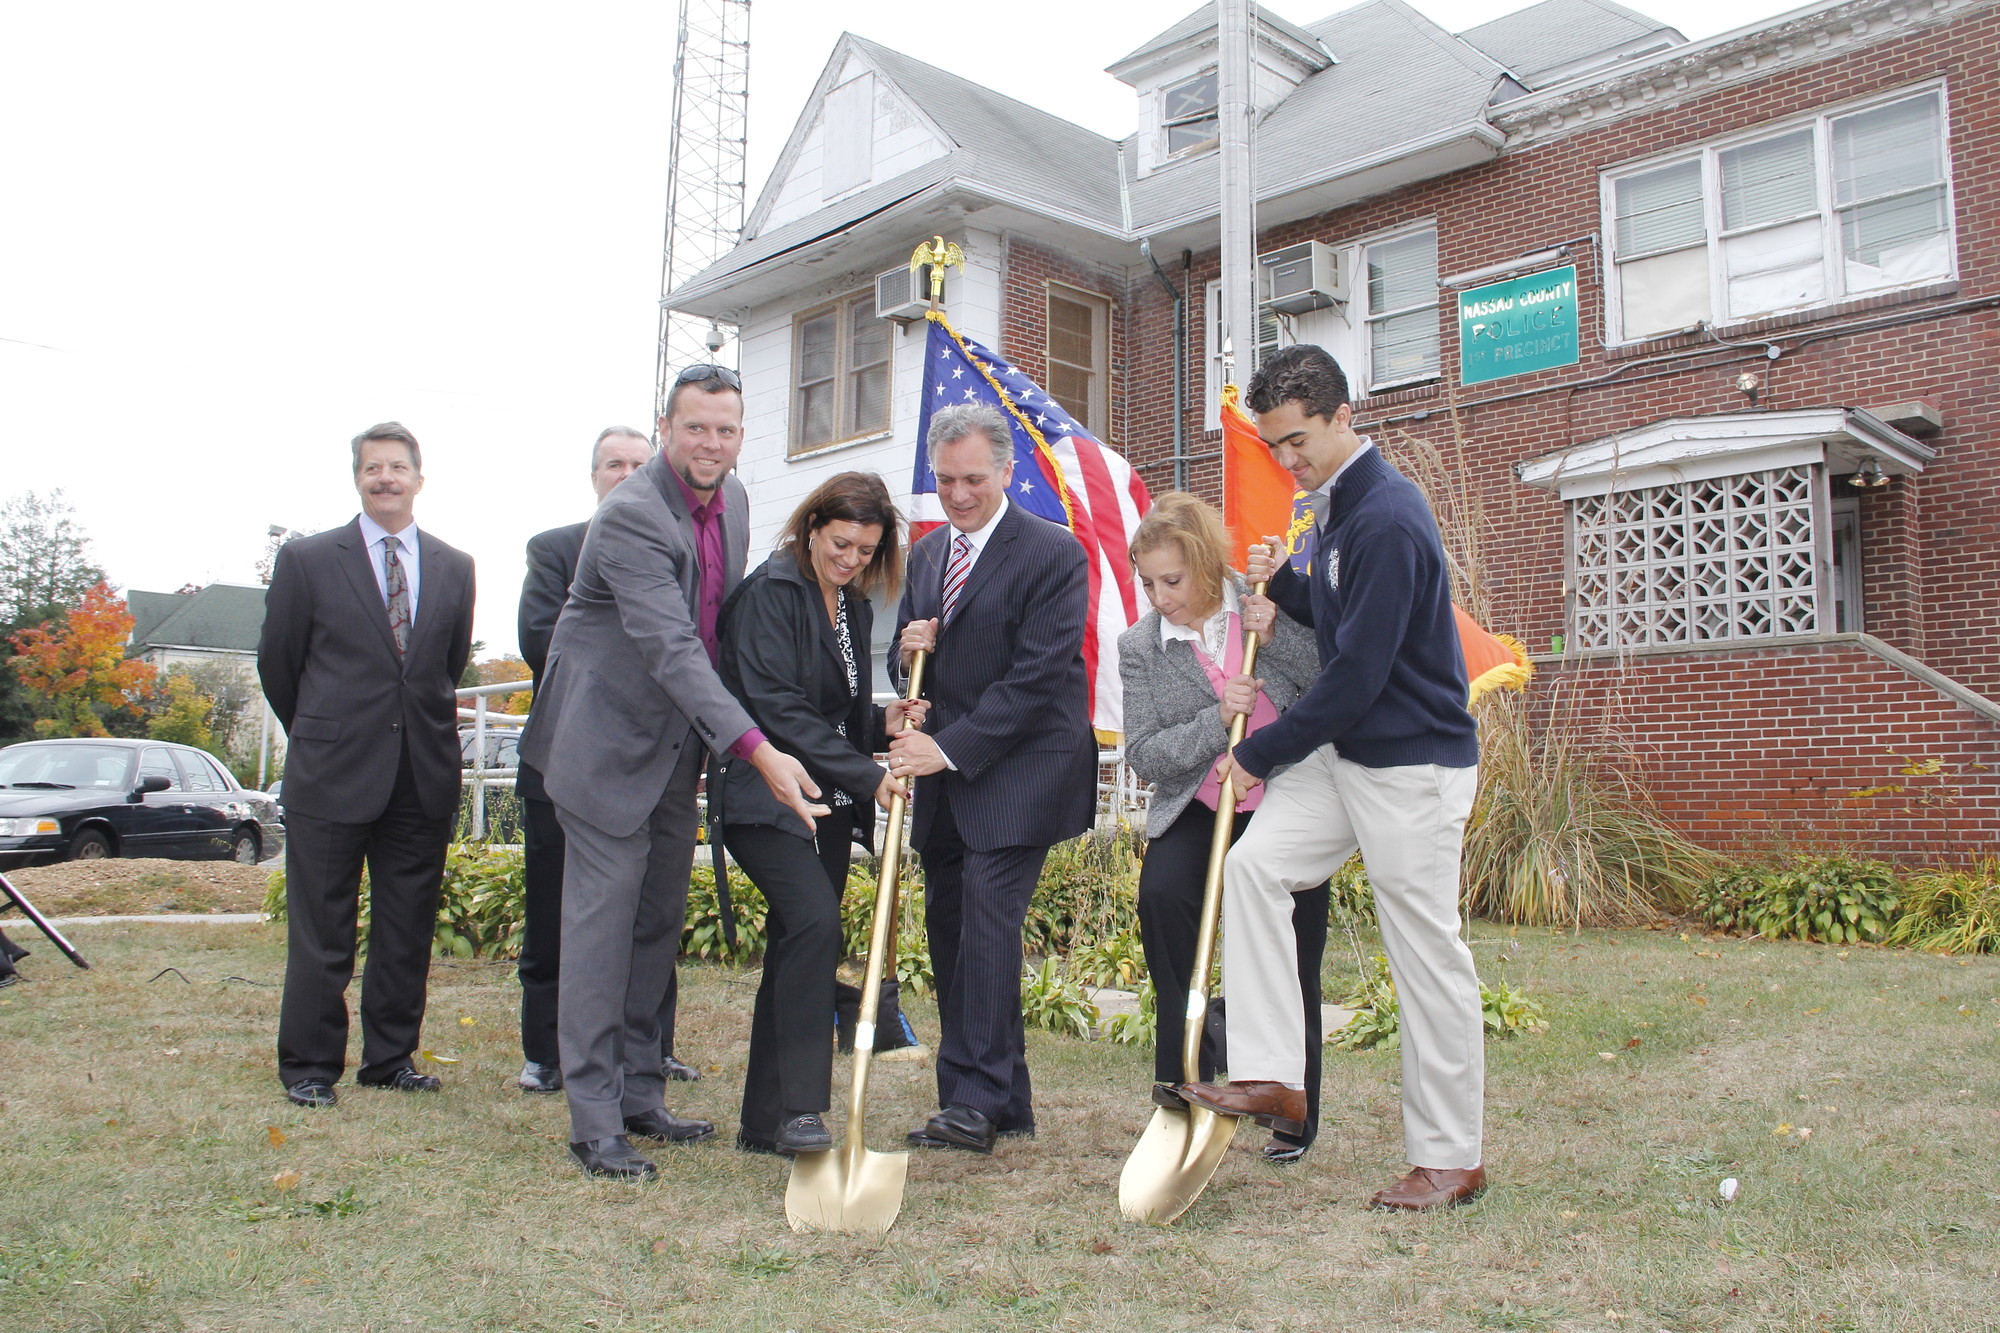 Ground was broken last week at the future site of the 1st Police Precinct in Baldwin. Eric Mahler, left, and Debbie Pugliese of the Chamber of Commerce helped Nassau County Executive Ed Mangano and Baldwin Civic Association members Karen Montalbano and David Viana at the ceremonial start of construction. The $10 million project is expected to take about 18 months.